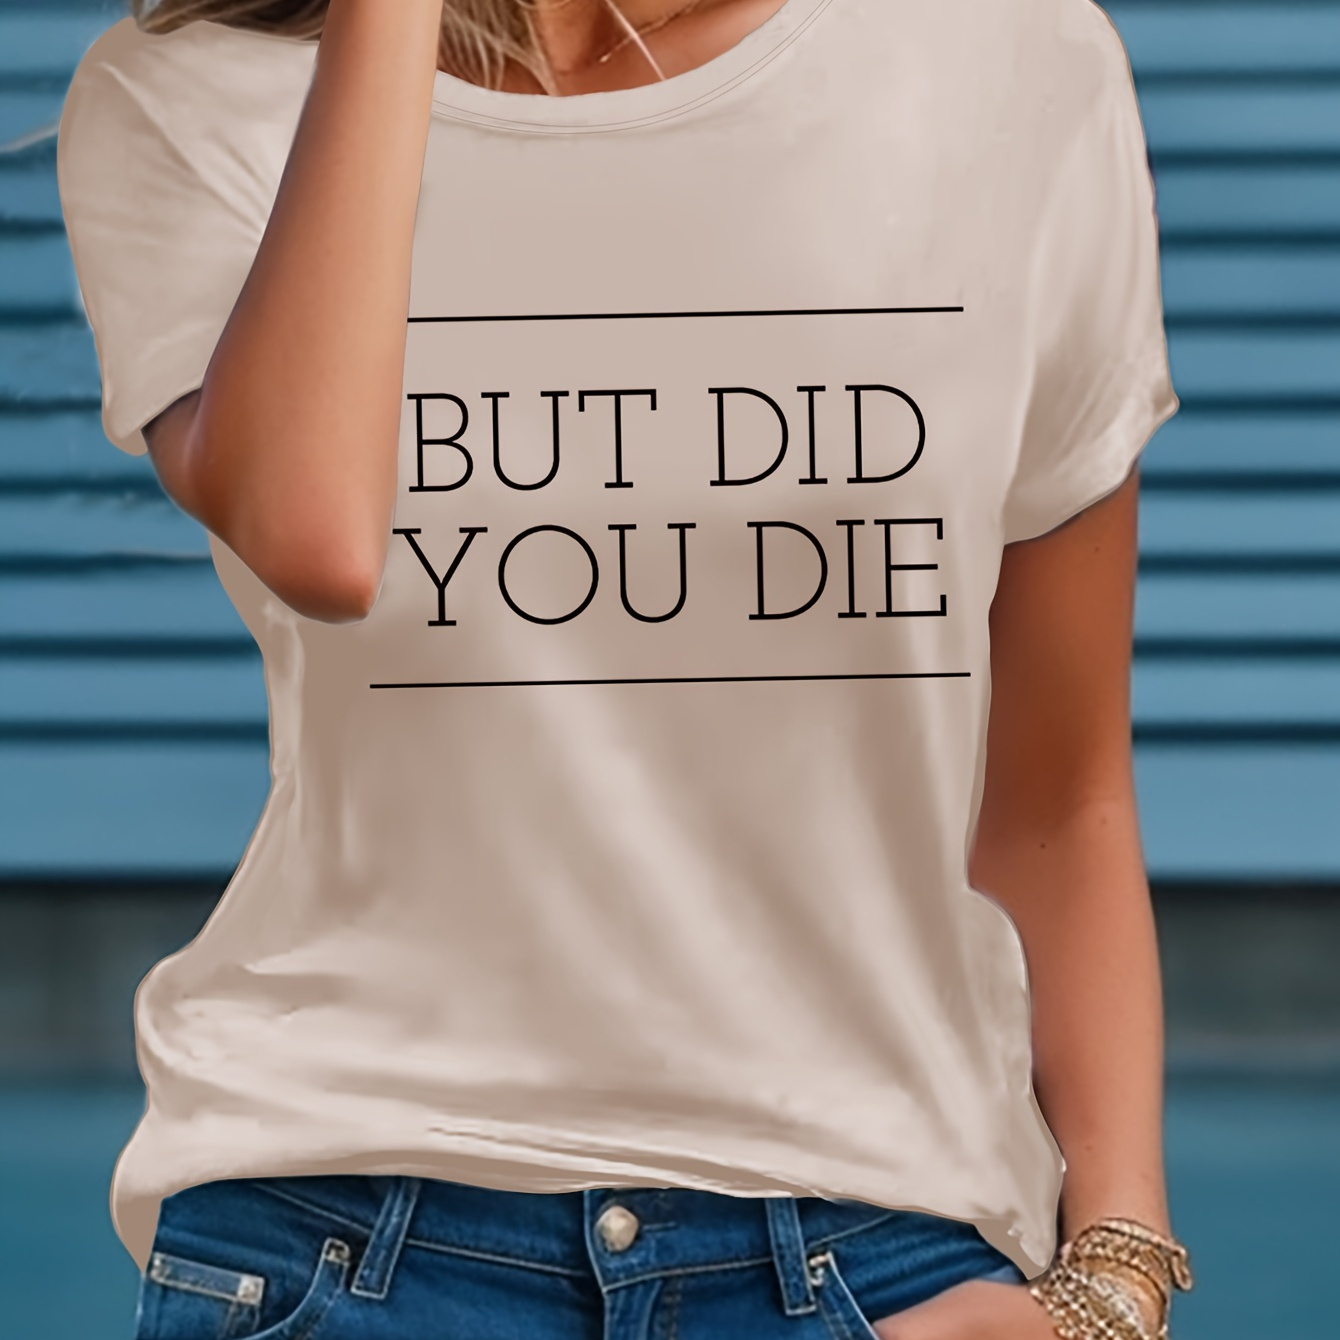 

But Did U Die Letter Print T-shirt, Short Sleeve Crew Neck Casual Top For Summer & Spring, Women's Clothing